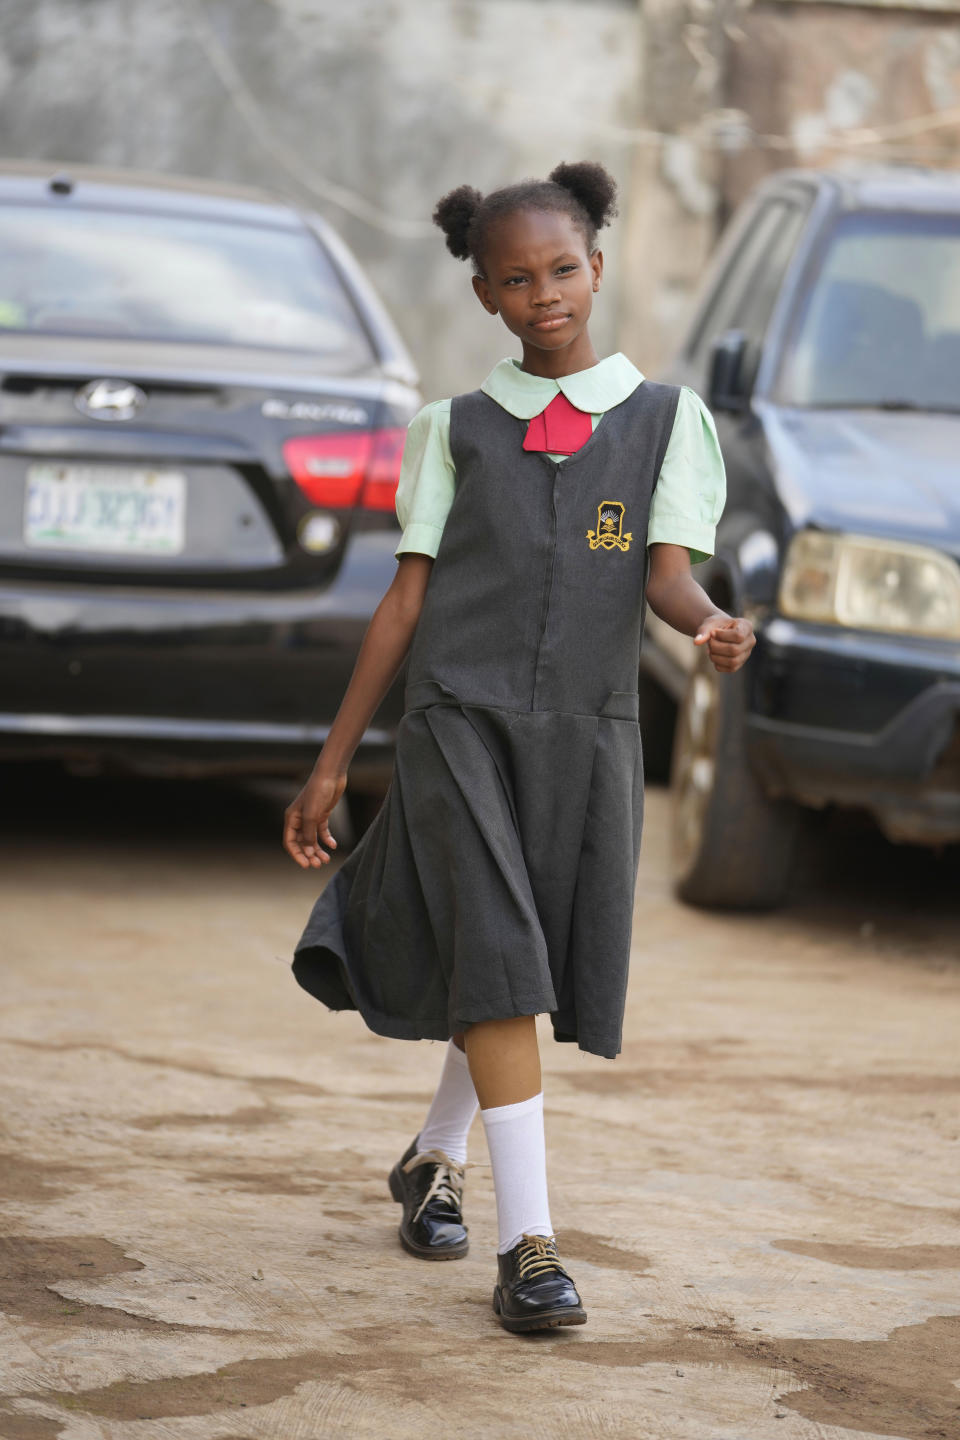 Princess Igbinosa, 10, who lost her leg following a traffic accident, models a school dress outside her parents' house in Lagos, Nigeria, Friday, Dec. 1, 2023. Princess can now walk, thanks to an artificial limb from the IREDE Foundation, a group providing children like her with free prosthetics and helping their families offset the average cost of $2,000 to $3,000.(AP Photo/Sunday Alamba)